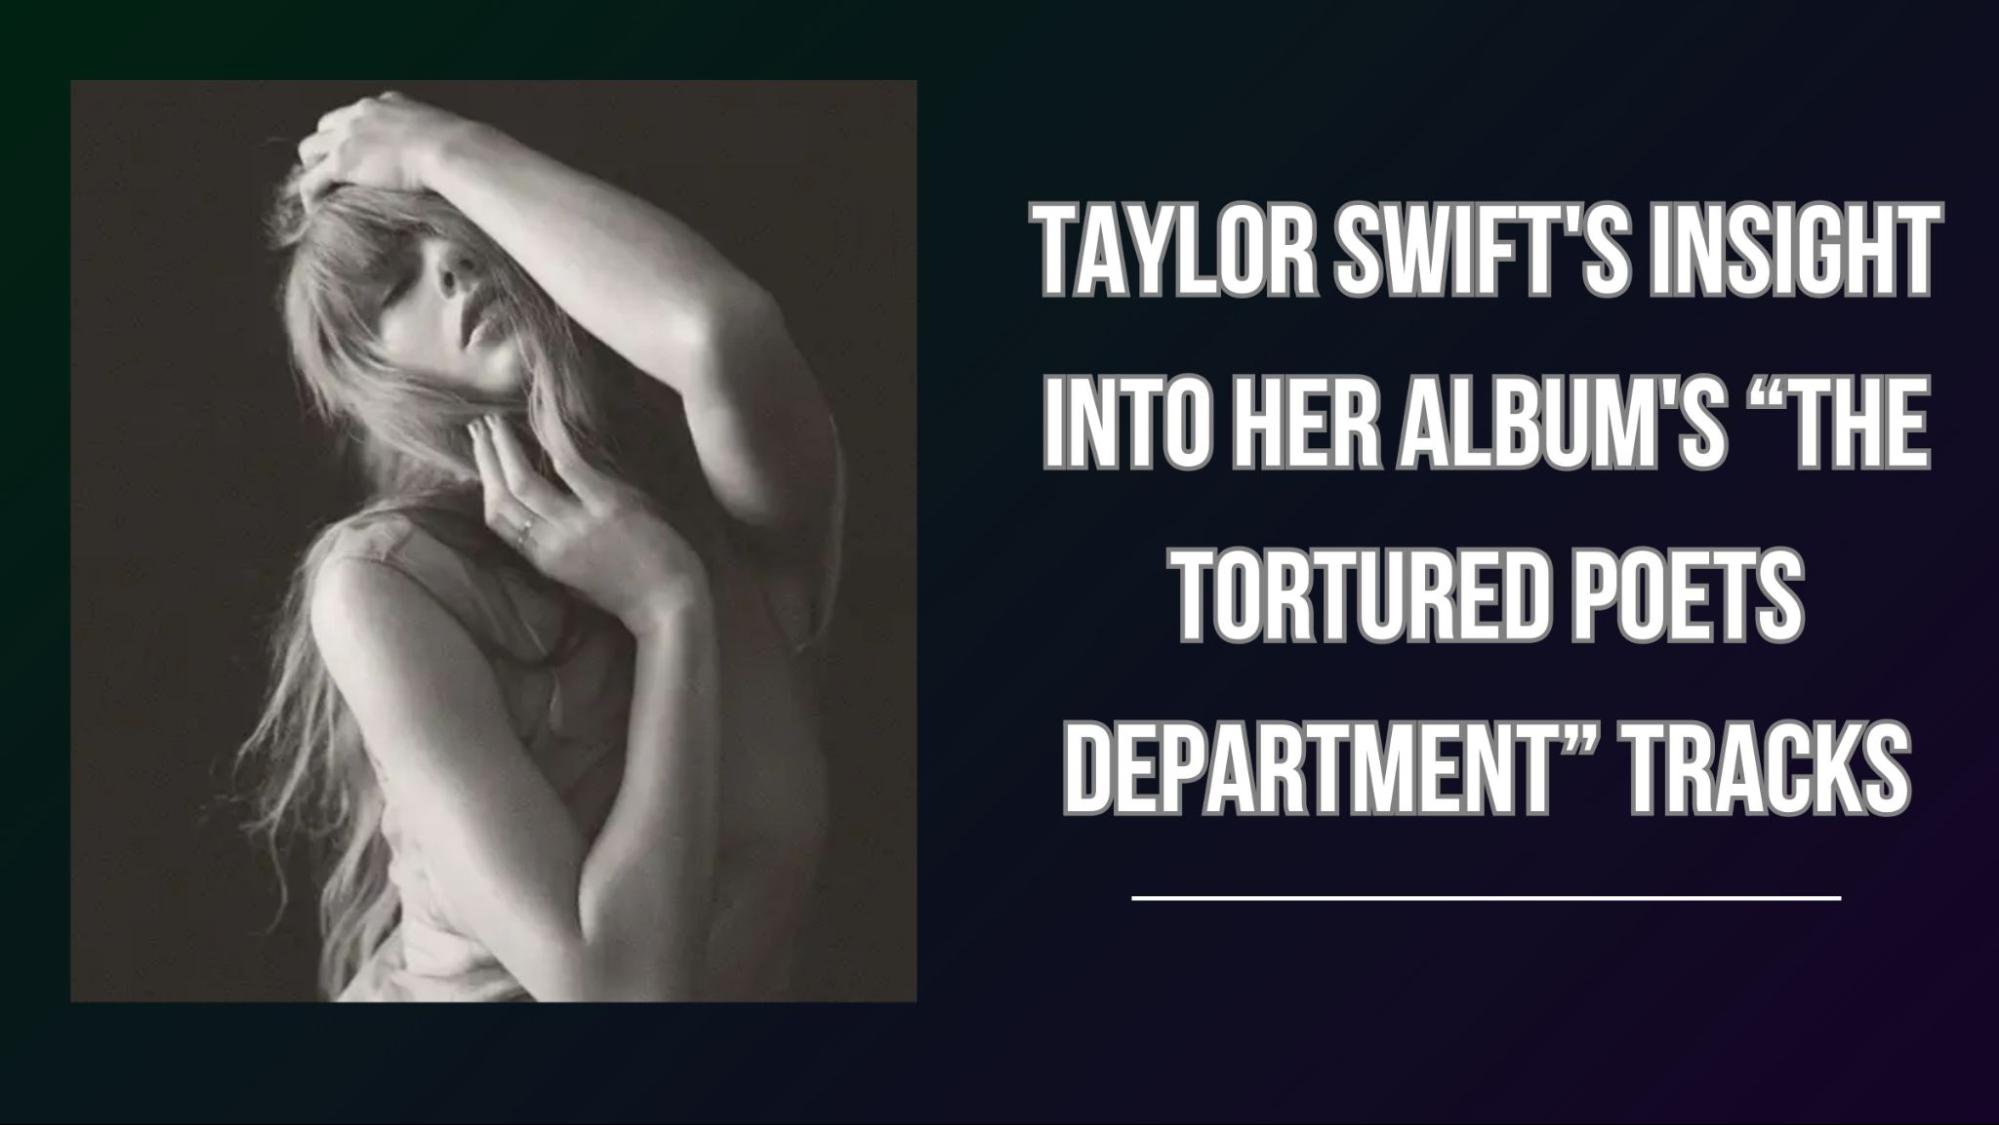 Taylor Swift's Insight into her Album's “The Tortured Poets Department” Tracks